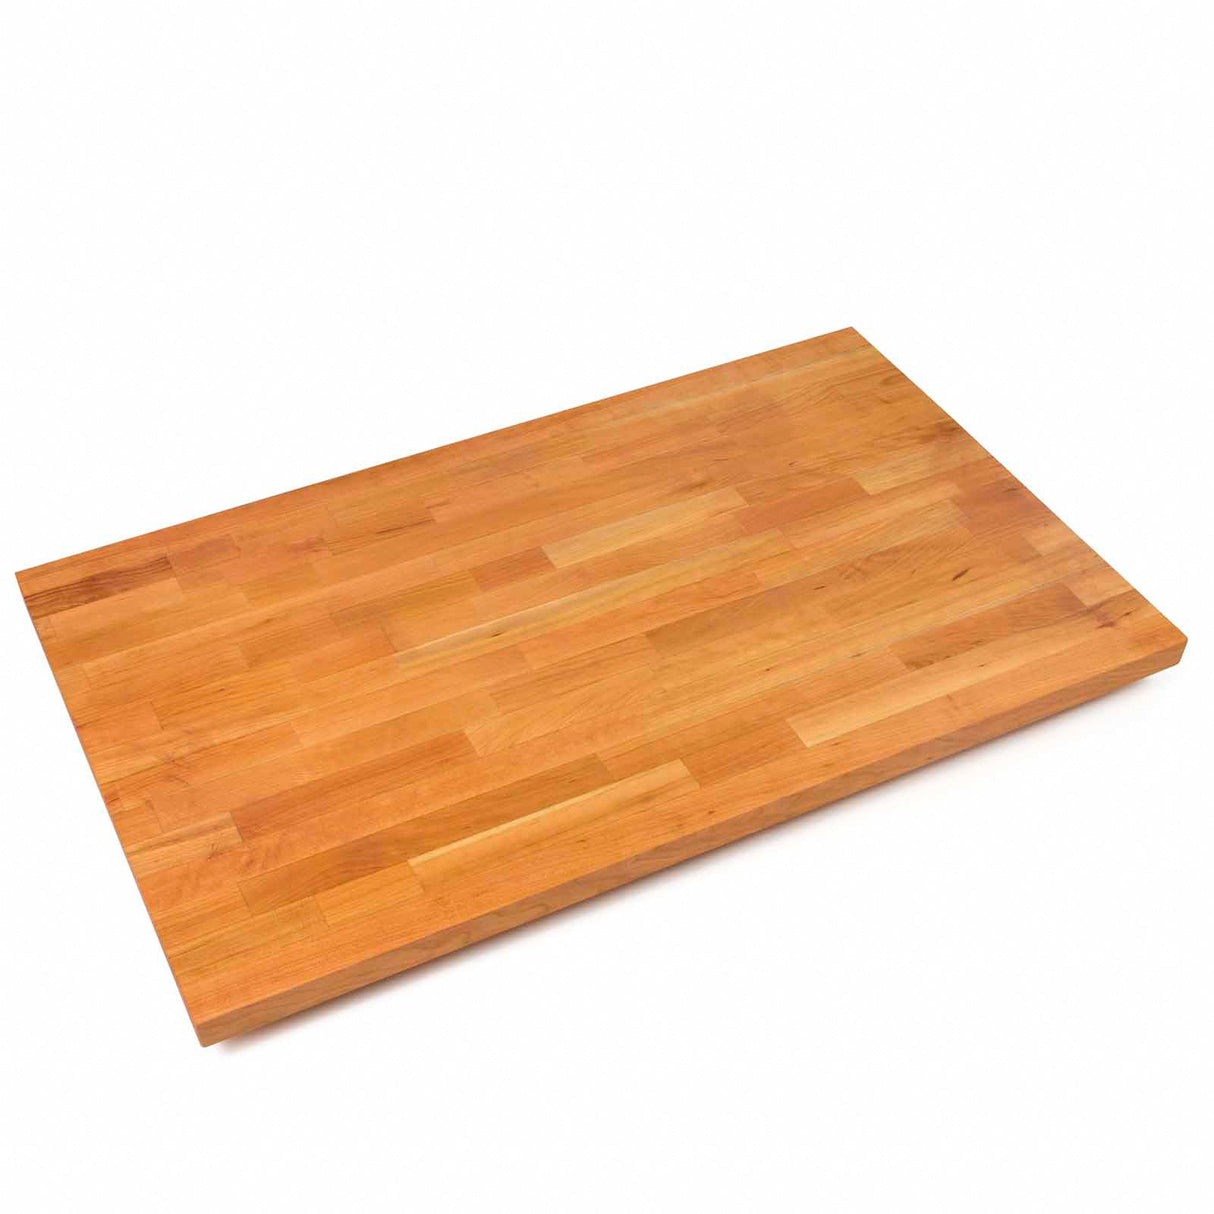 John Boos CHYKCT-BL7225-O Blended Cherry Counter Top with Oil Finish, 1.5" Thickness, 72" x 25" CHERRY BLENDED KCT 72X25X1-1/2 OIL